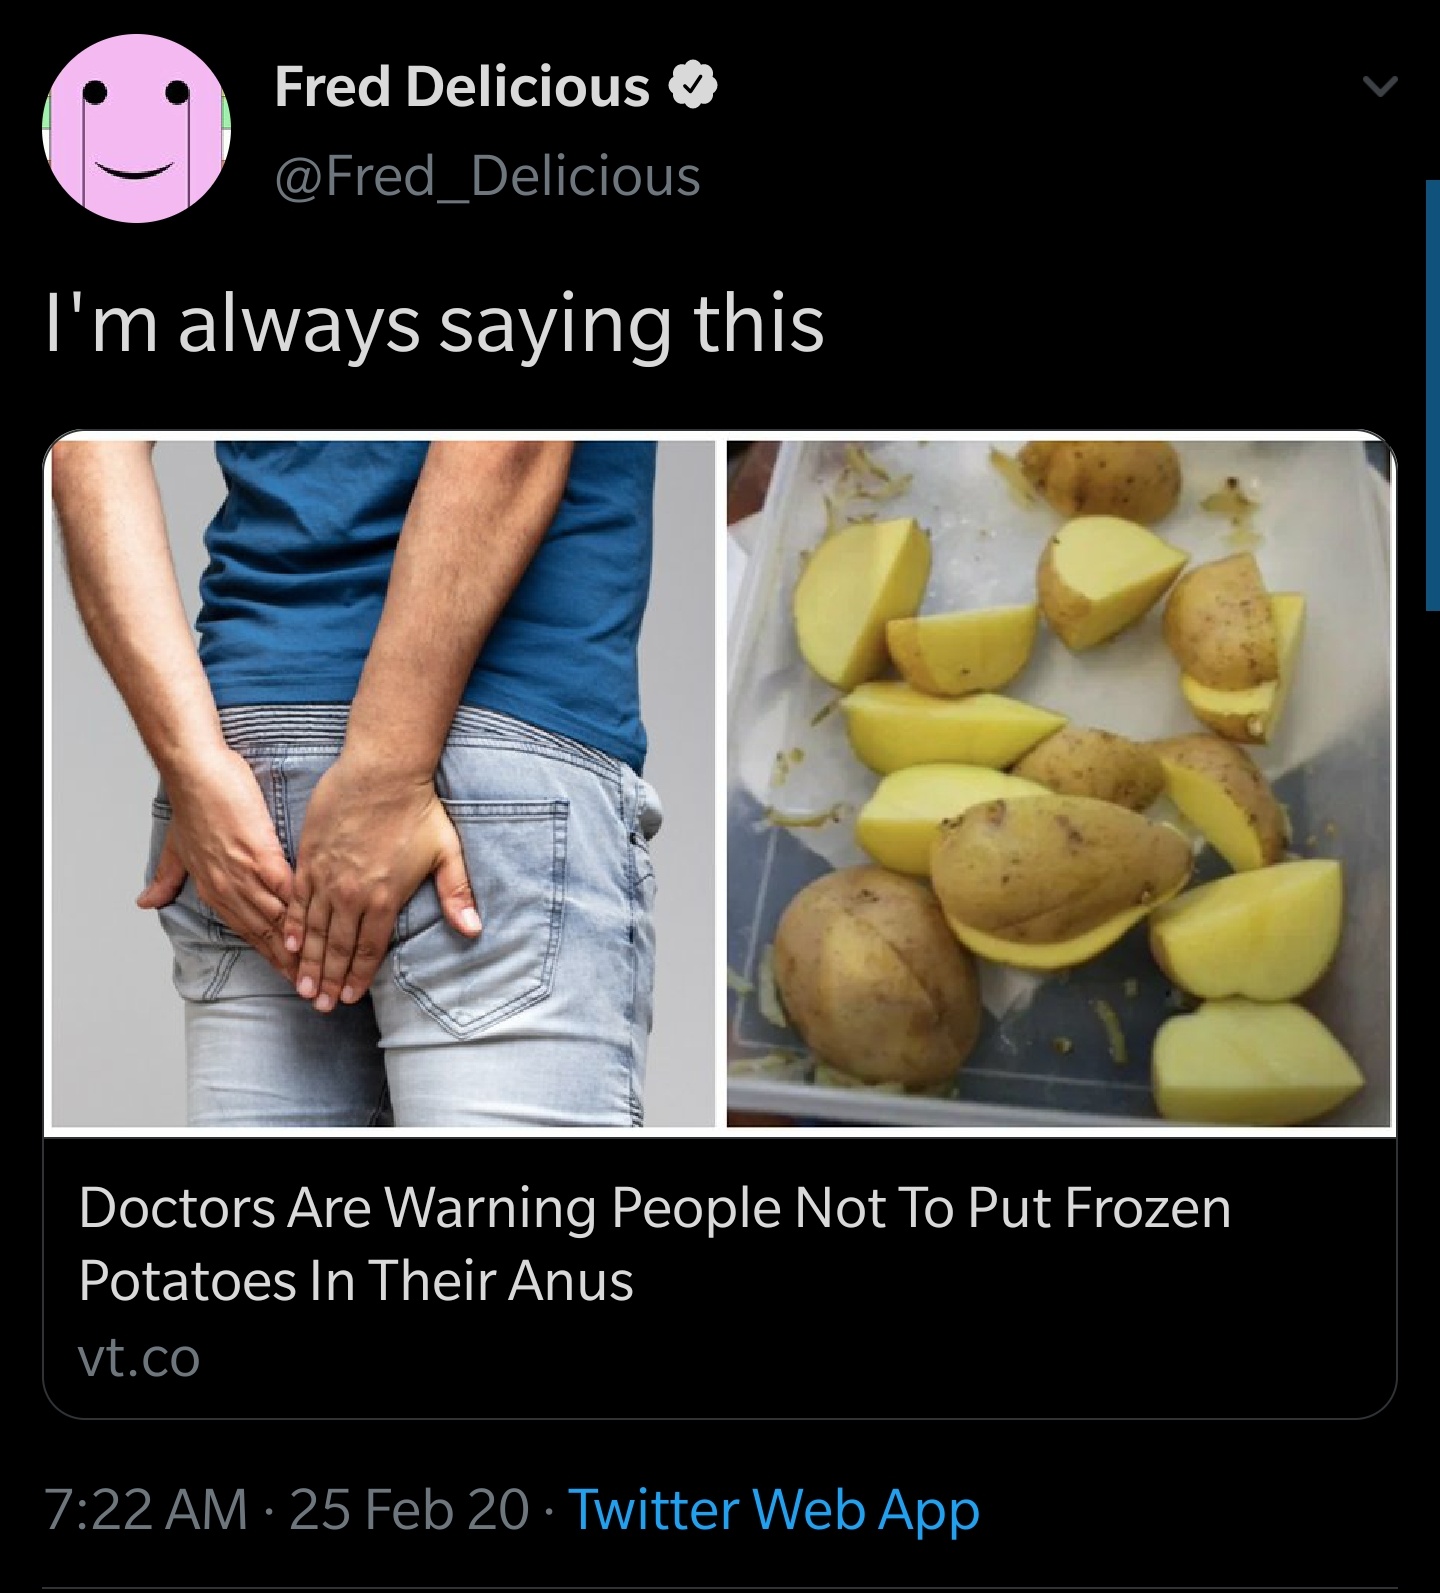 photo caption - Fred Delicious I'm always saying this 101 Doctors Are Warning People Not To Put Frozen Potatoes In Their Anus vt.Co 25 Feb 20. Twitter Web App